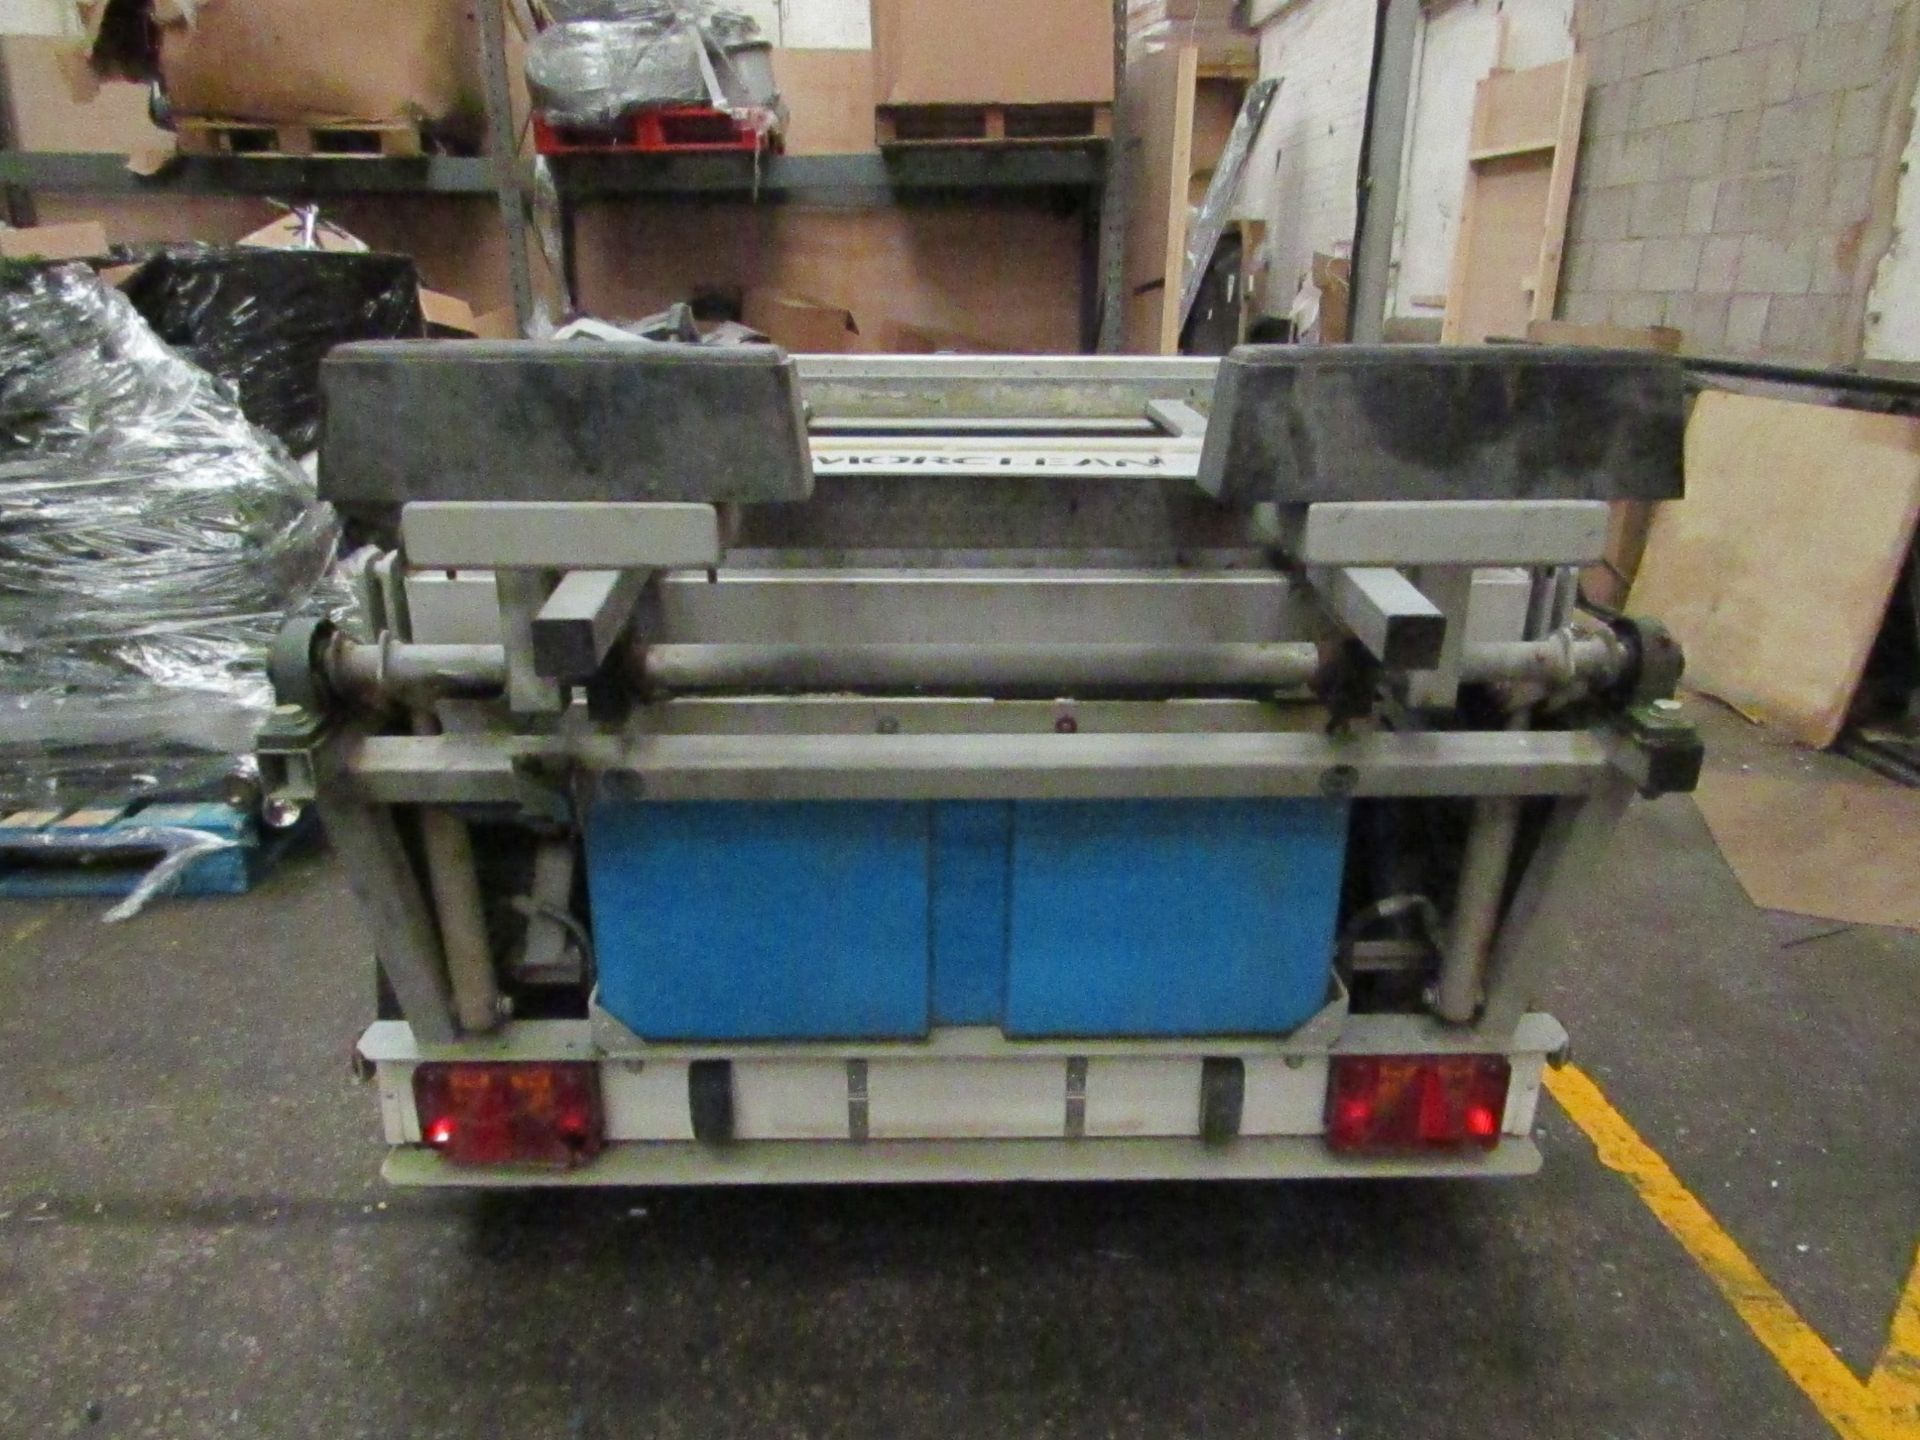 Morclean Bin wash Trailer, Vendor has informed us that it is in working order and he has not used it - Image 4 of 10